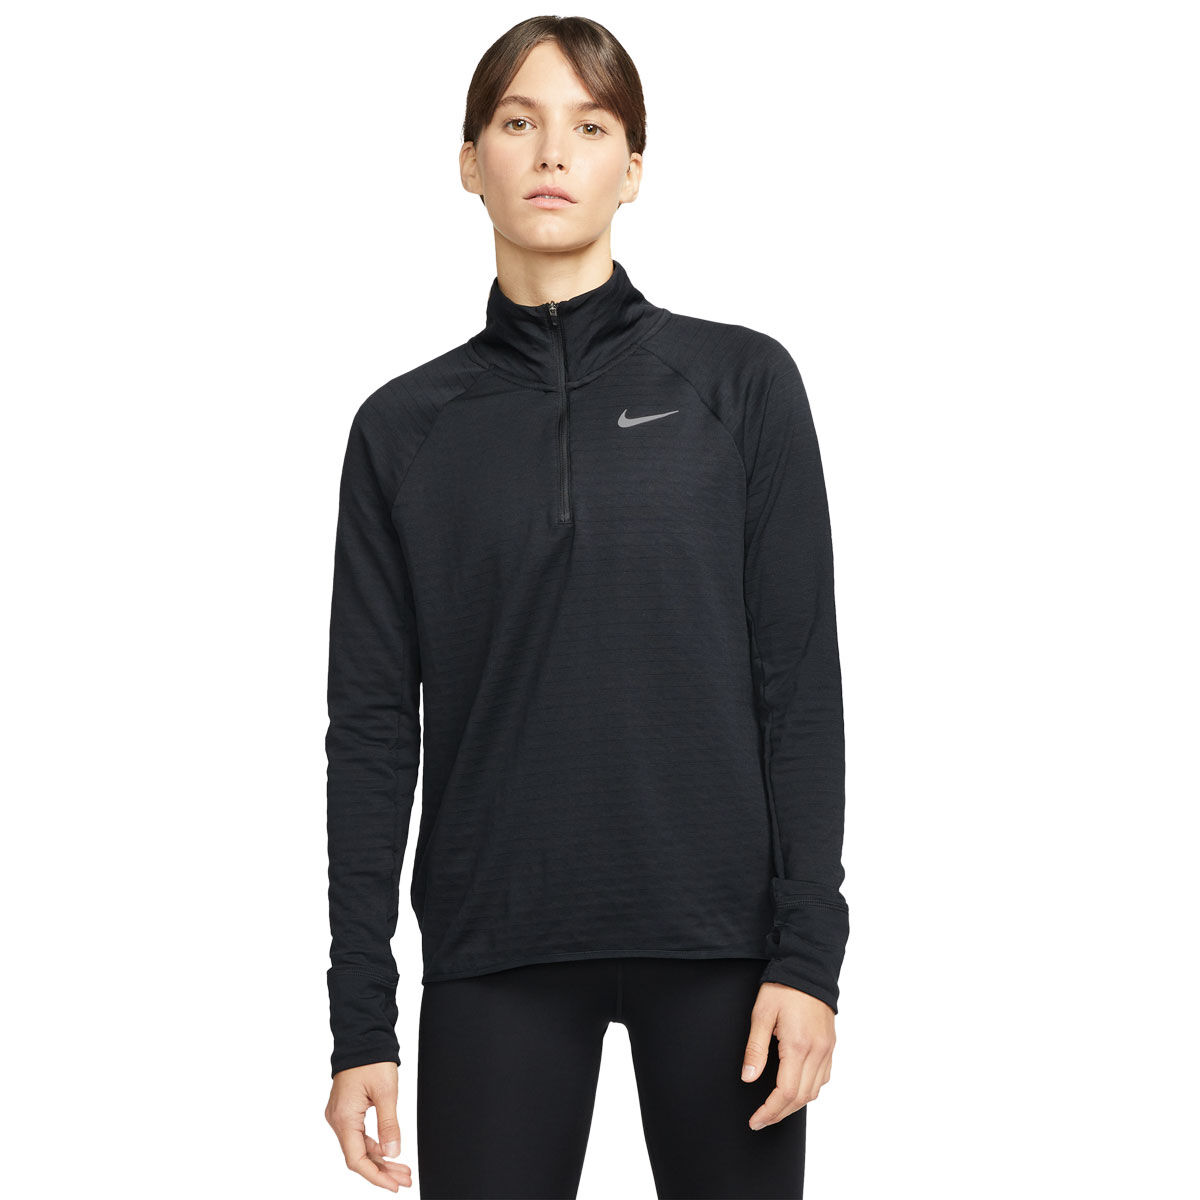 Nike Womens Therma-FIT Element 1/2 Zip Running Top